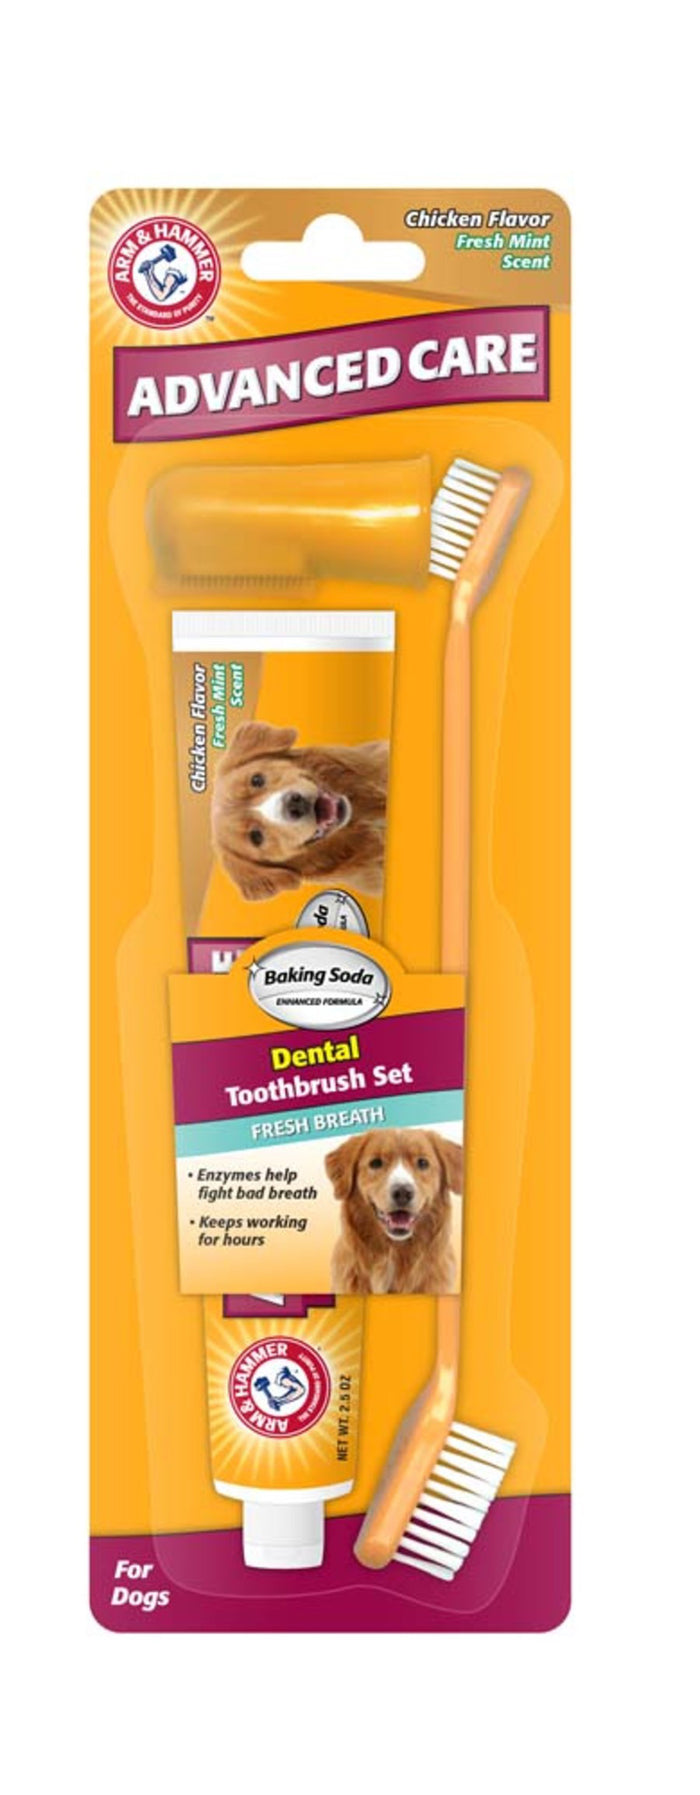 Arm & Hammer Advanced Care Fresh Breath Dental Toothbrush Set for Dogs Chicken Flavor Enzymatic Toothpaste: 2.5 oz